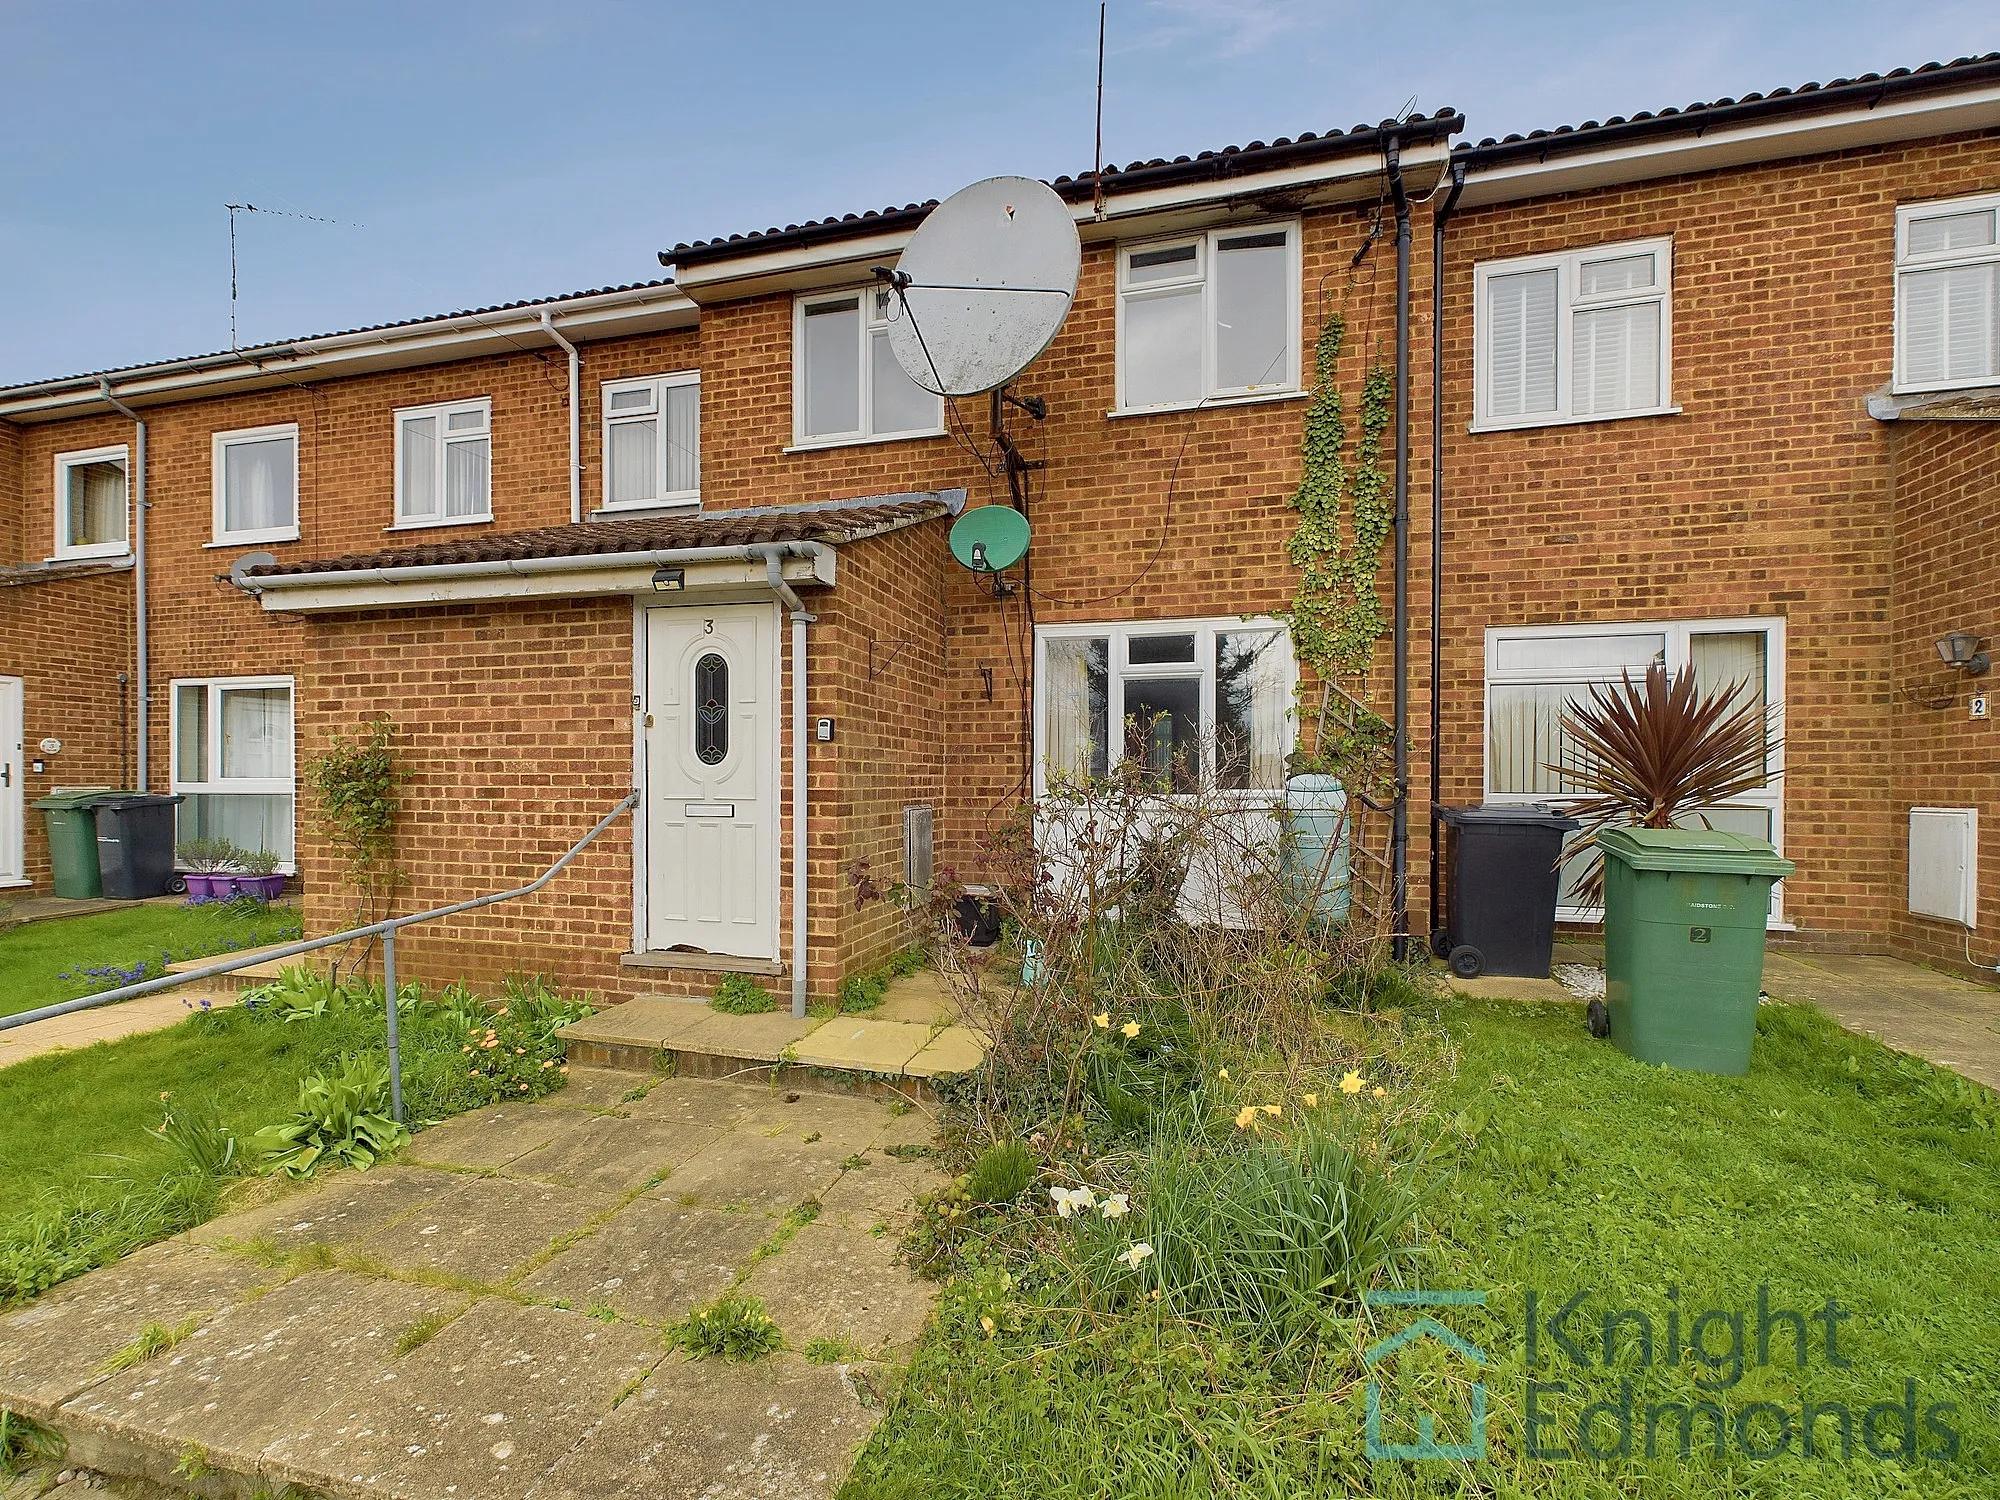 3 bed mid-terraced house for sale in Elmstone Close, Maidstone - Property Image 1